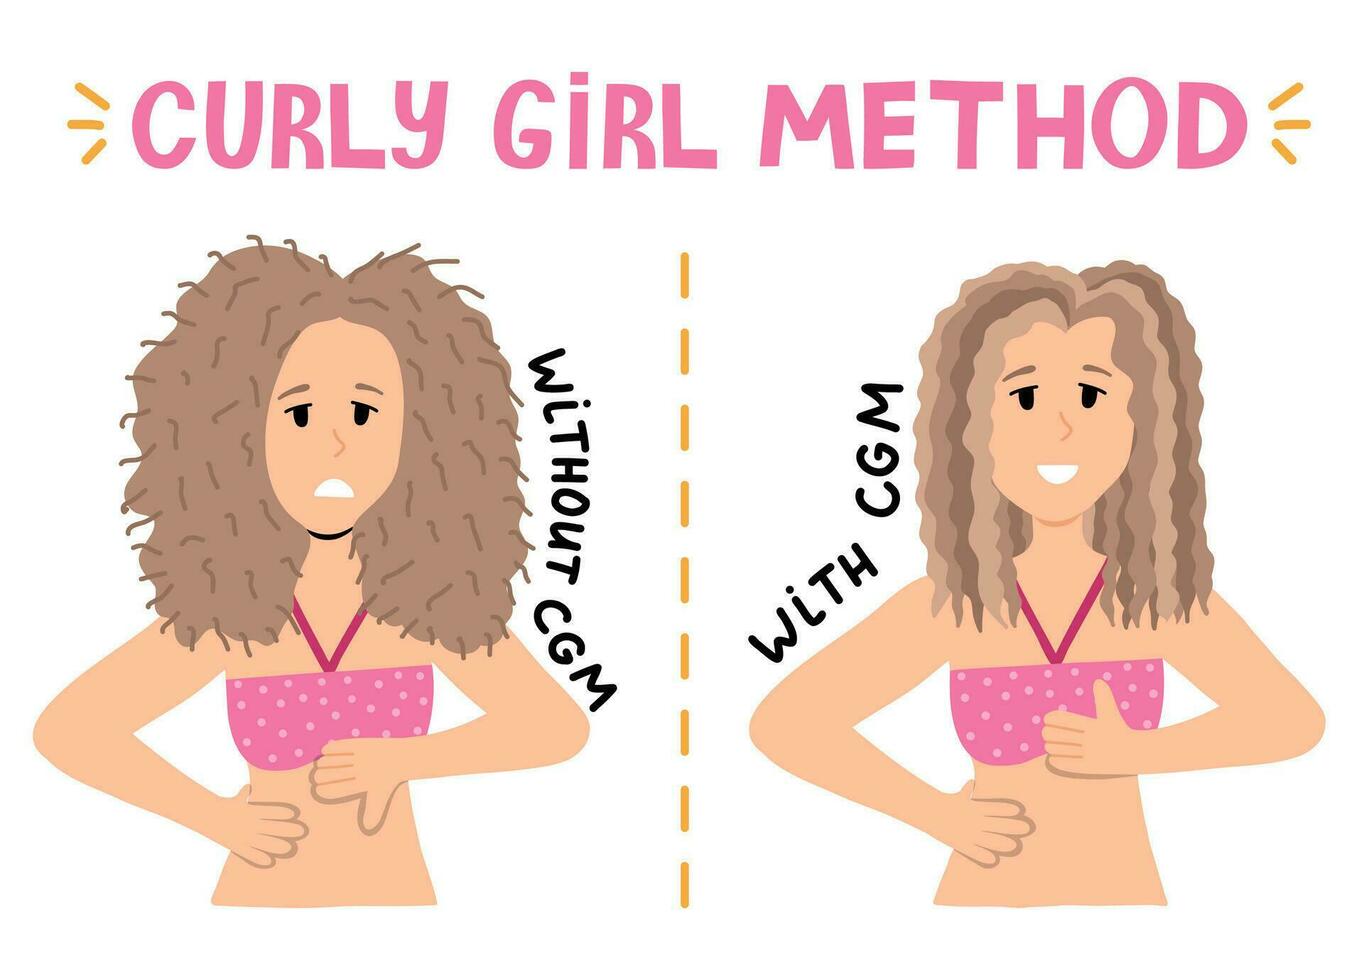 Design concept of hair care process for Curly Girl Method. Woman and girls wash, condition, style and dry curly, wavy and frizzy hair. CGM in steps. Curly hair routine in infographic. vector